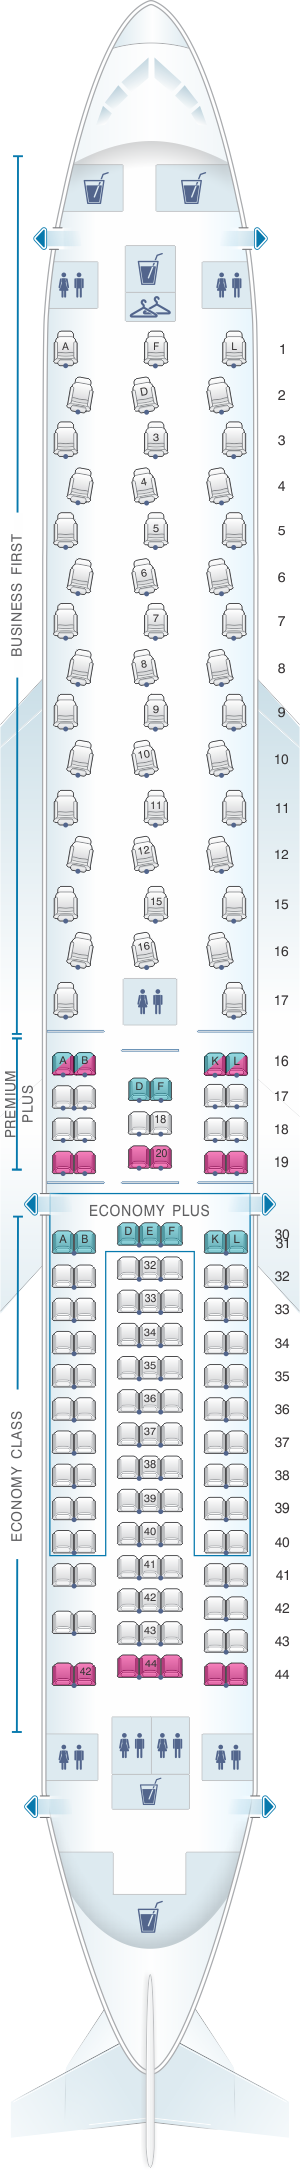 Seat map for United Airlines Boeing B767 300ER - version 2